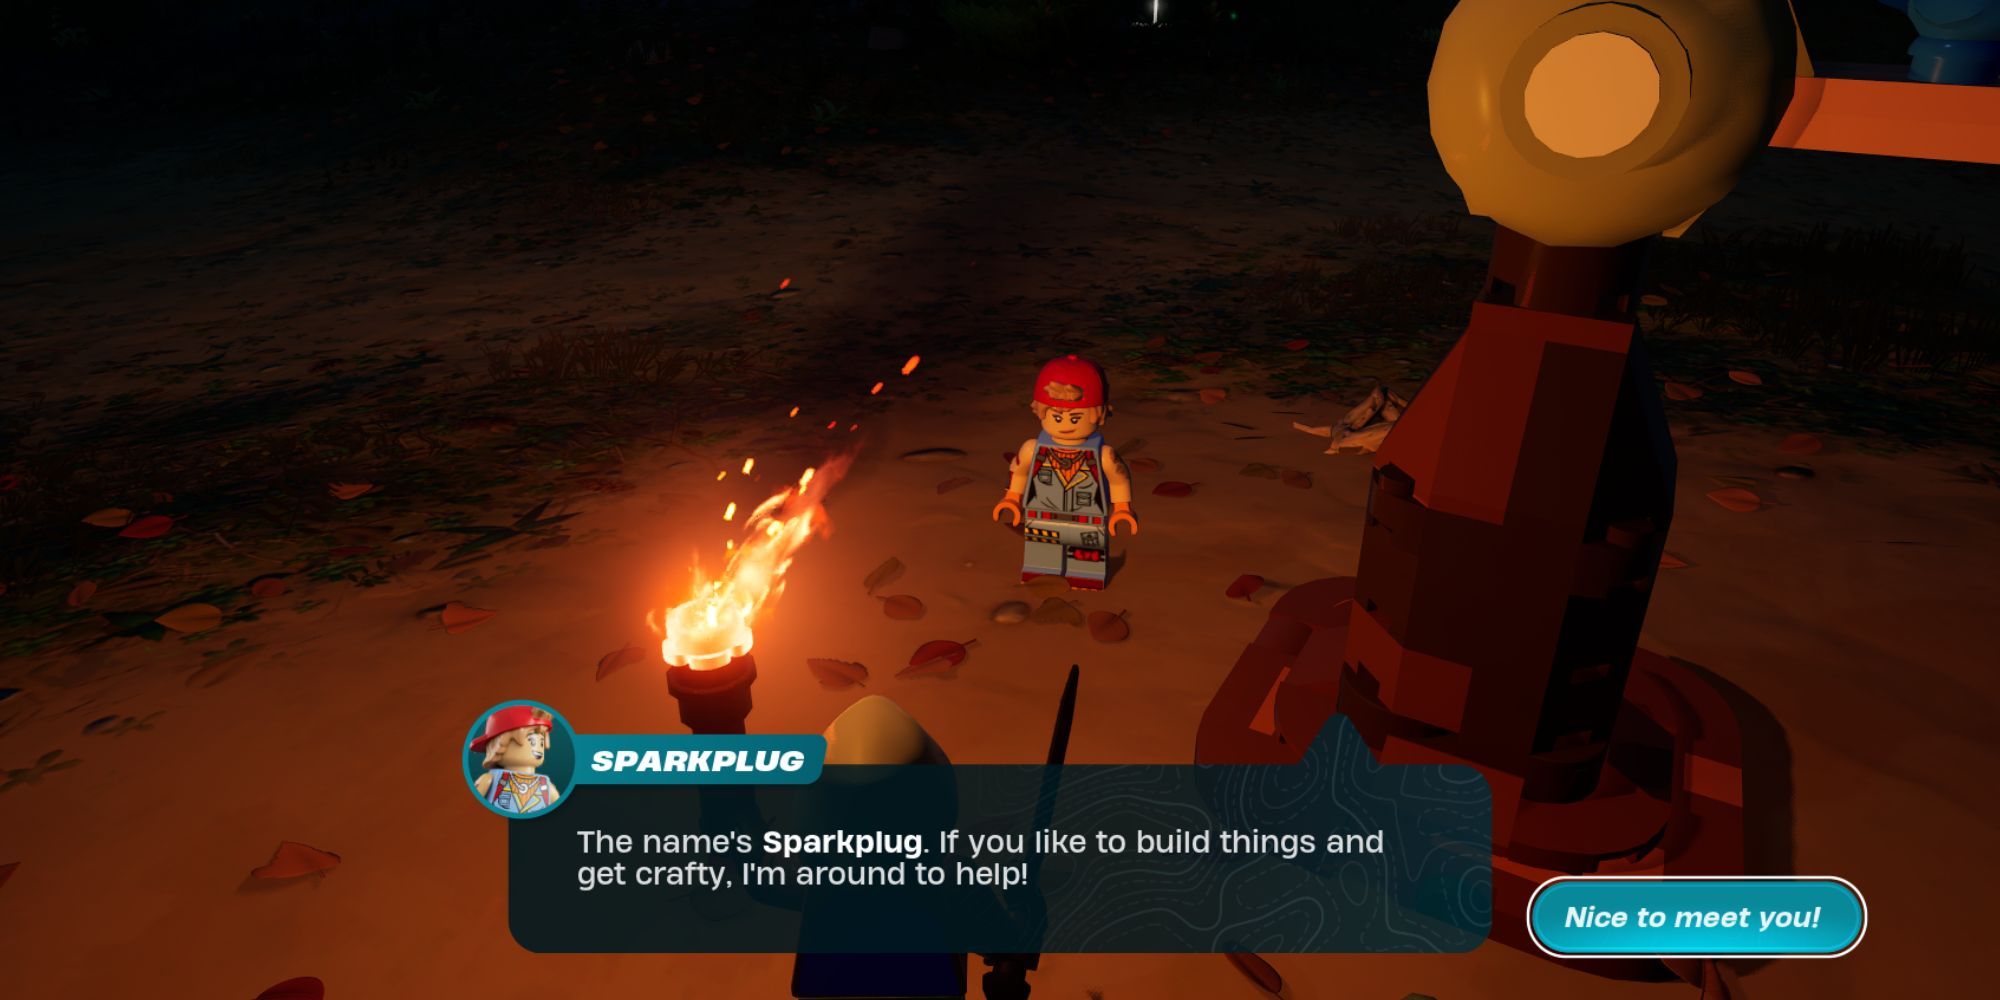 A dialogue with Sparkplug, a lego character wearing a mechanic's jumpsuit and a backwards red baseball cap.